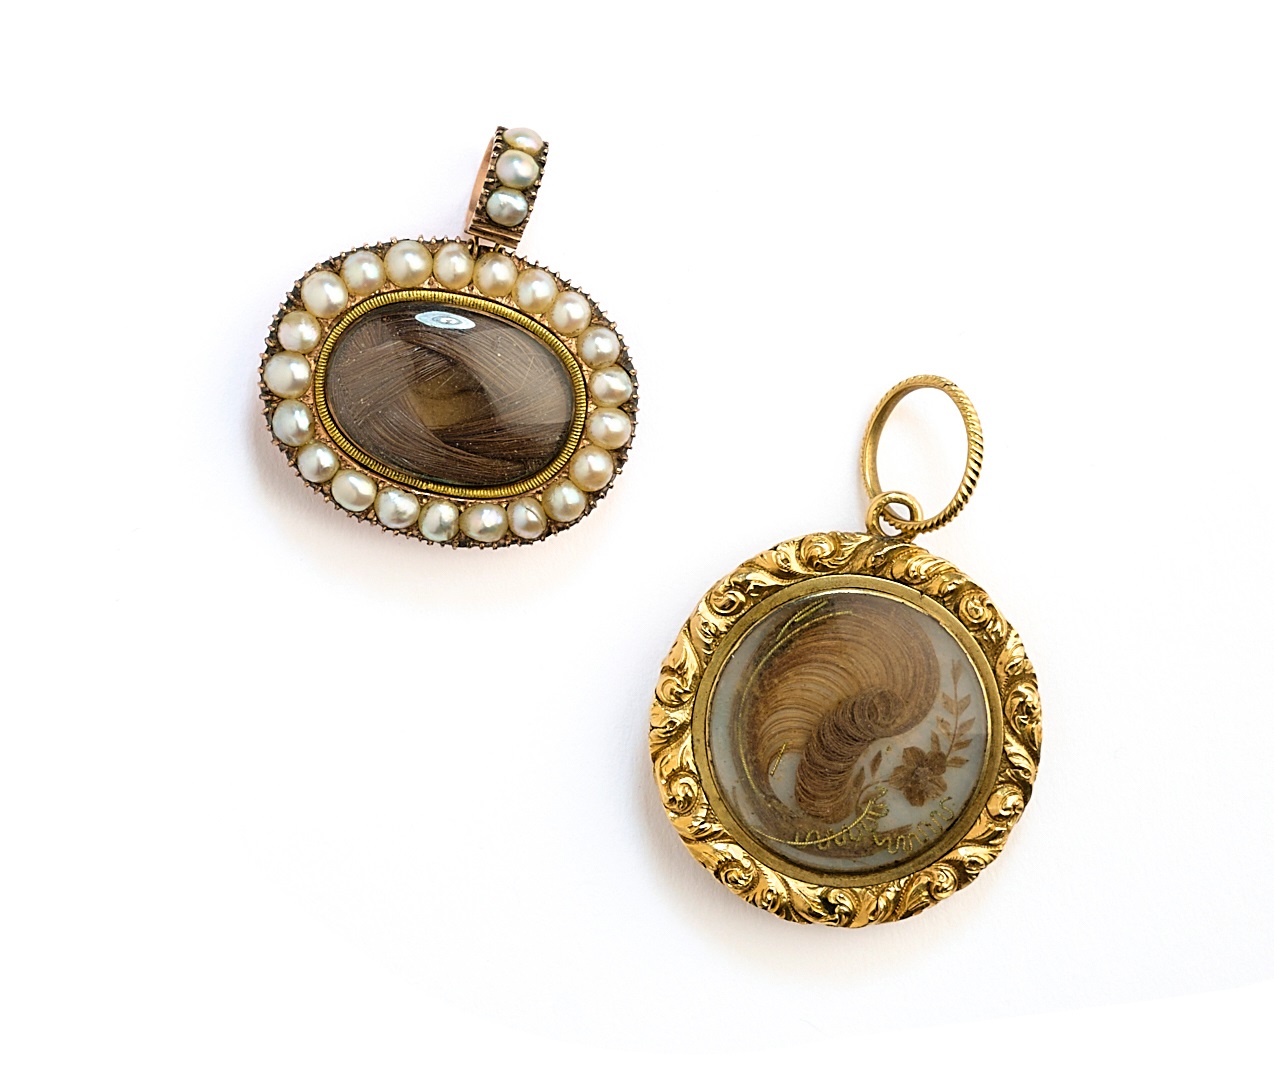 FOUR ANTIQUE LOCKETS, 1800s AND LATER